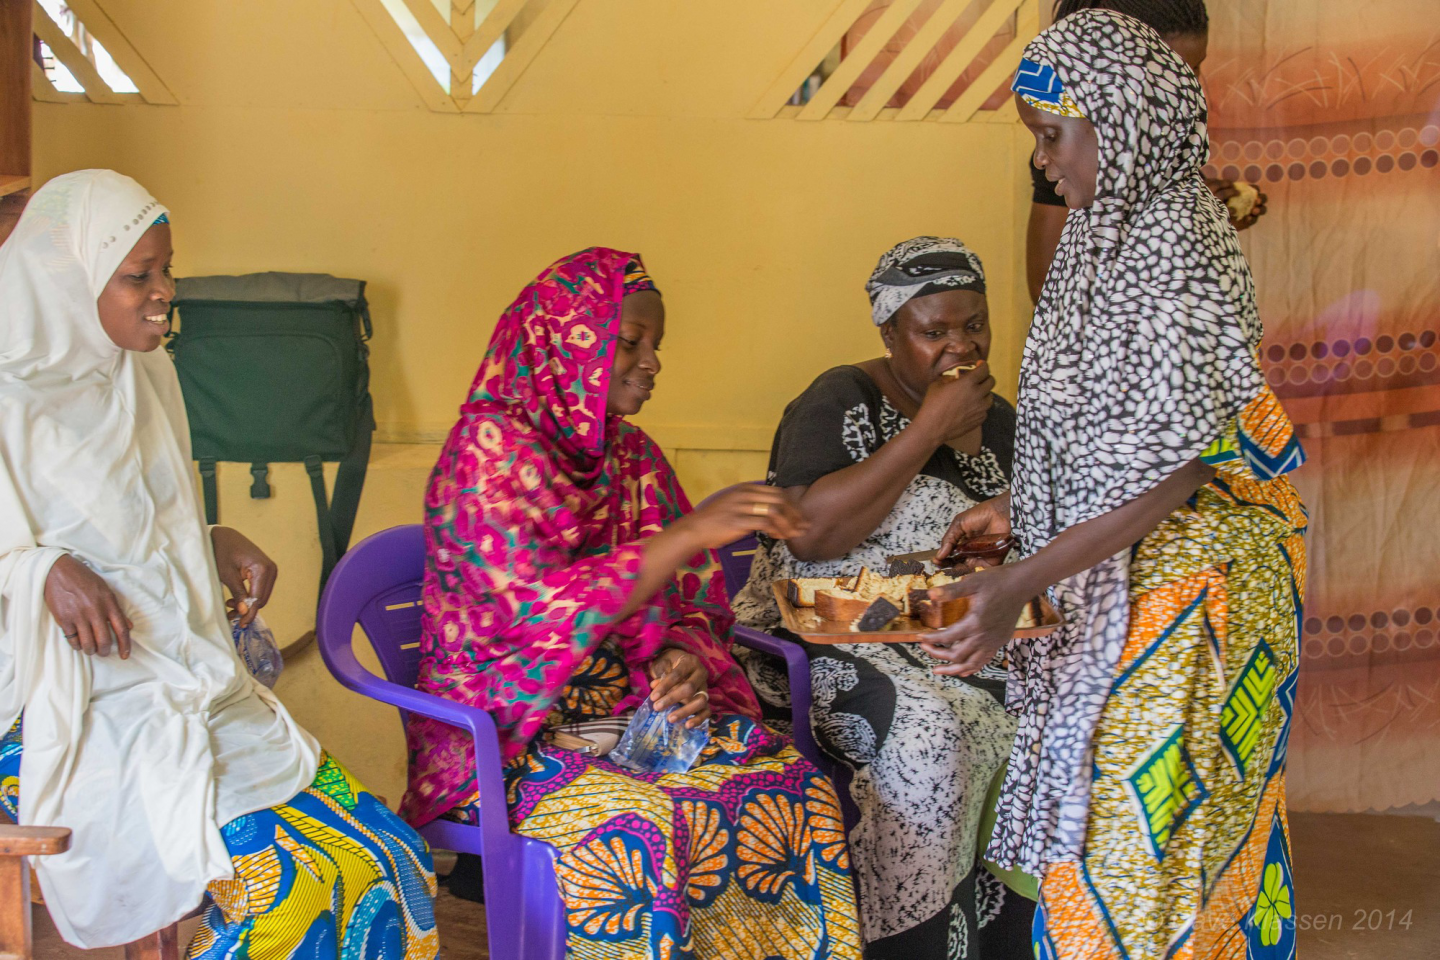 A Nigerian woman serves three other women (who are sitting down) pieces of bread